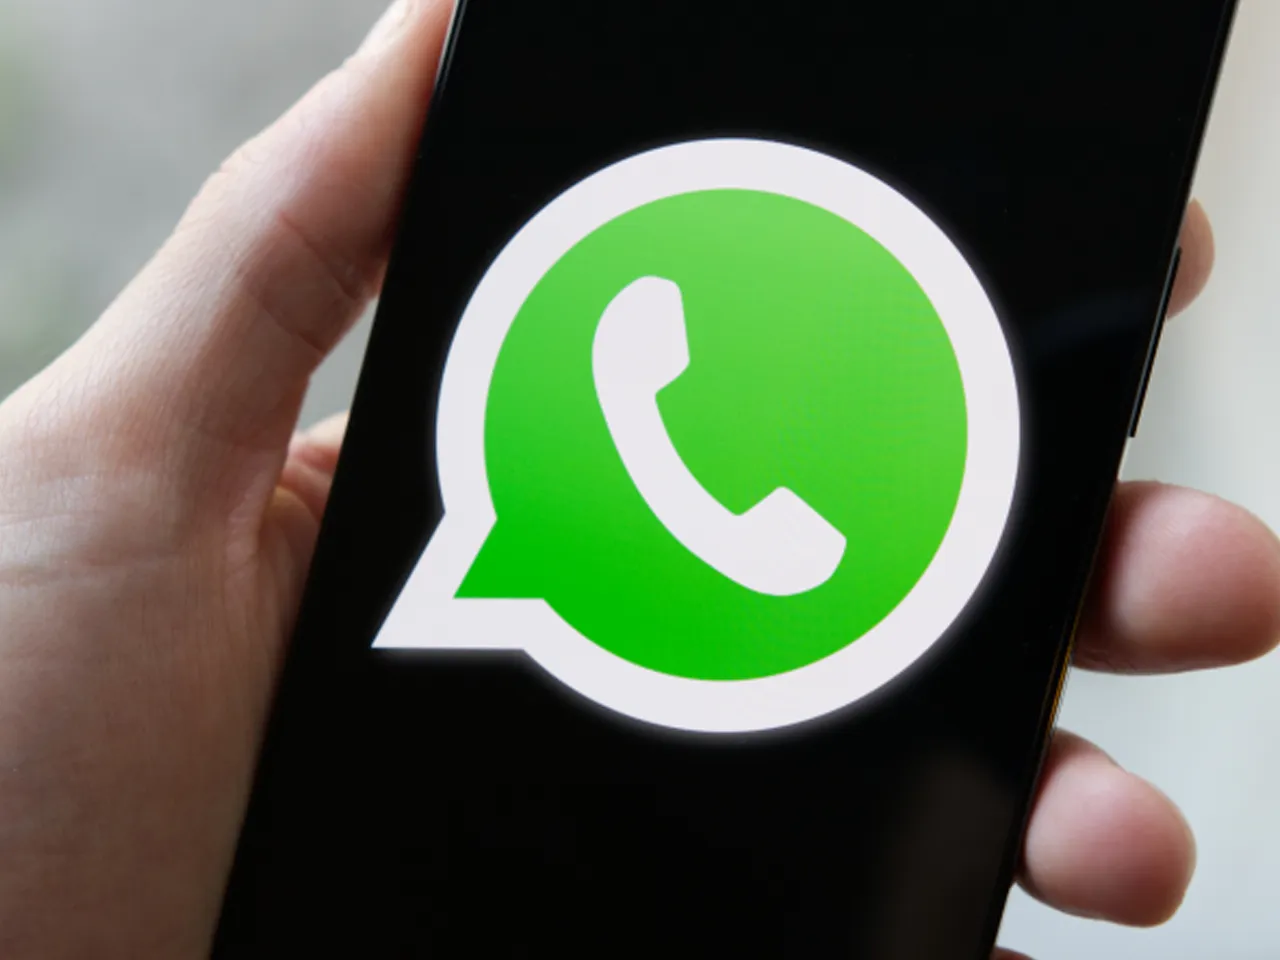 WhatsApp launches passwordless logins with fingerprint or facial recognition